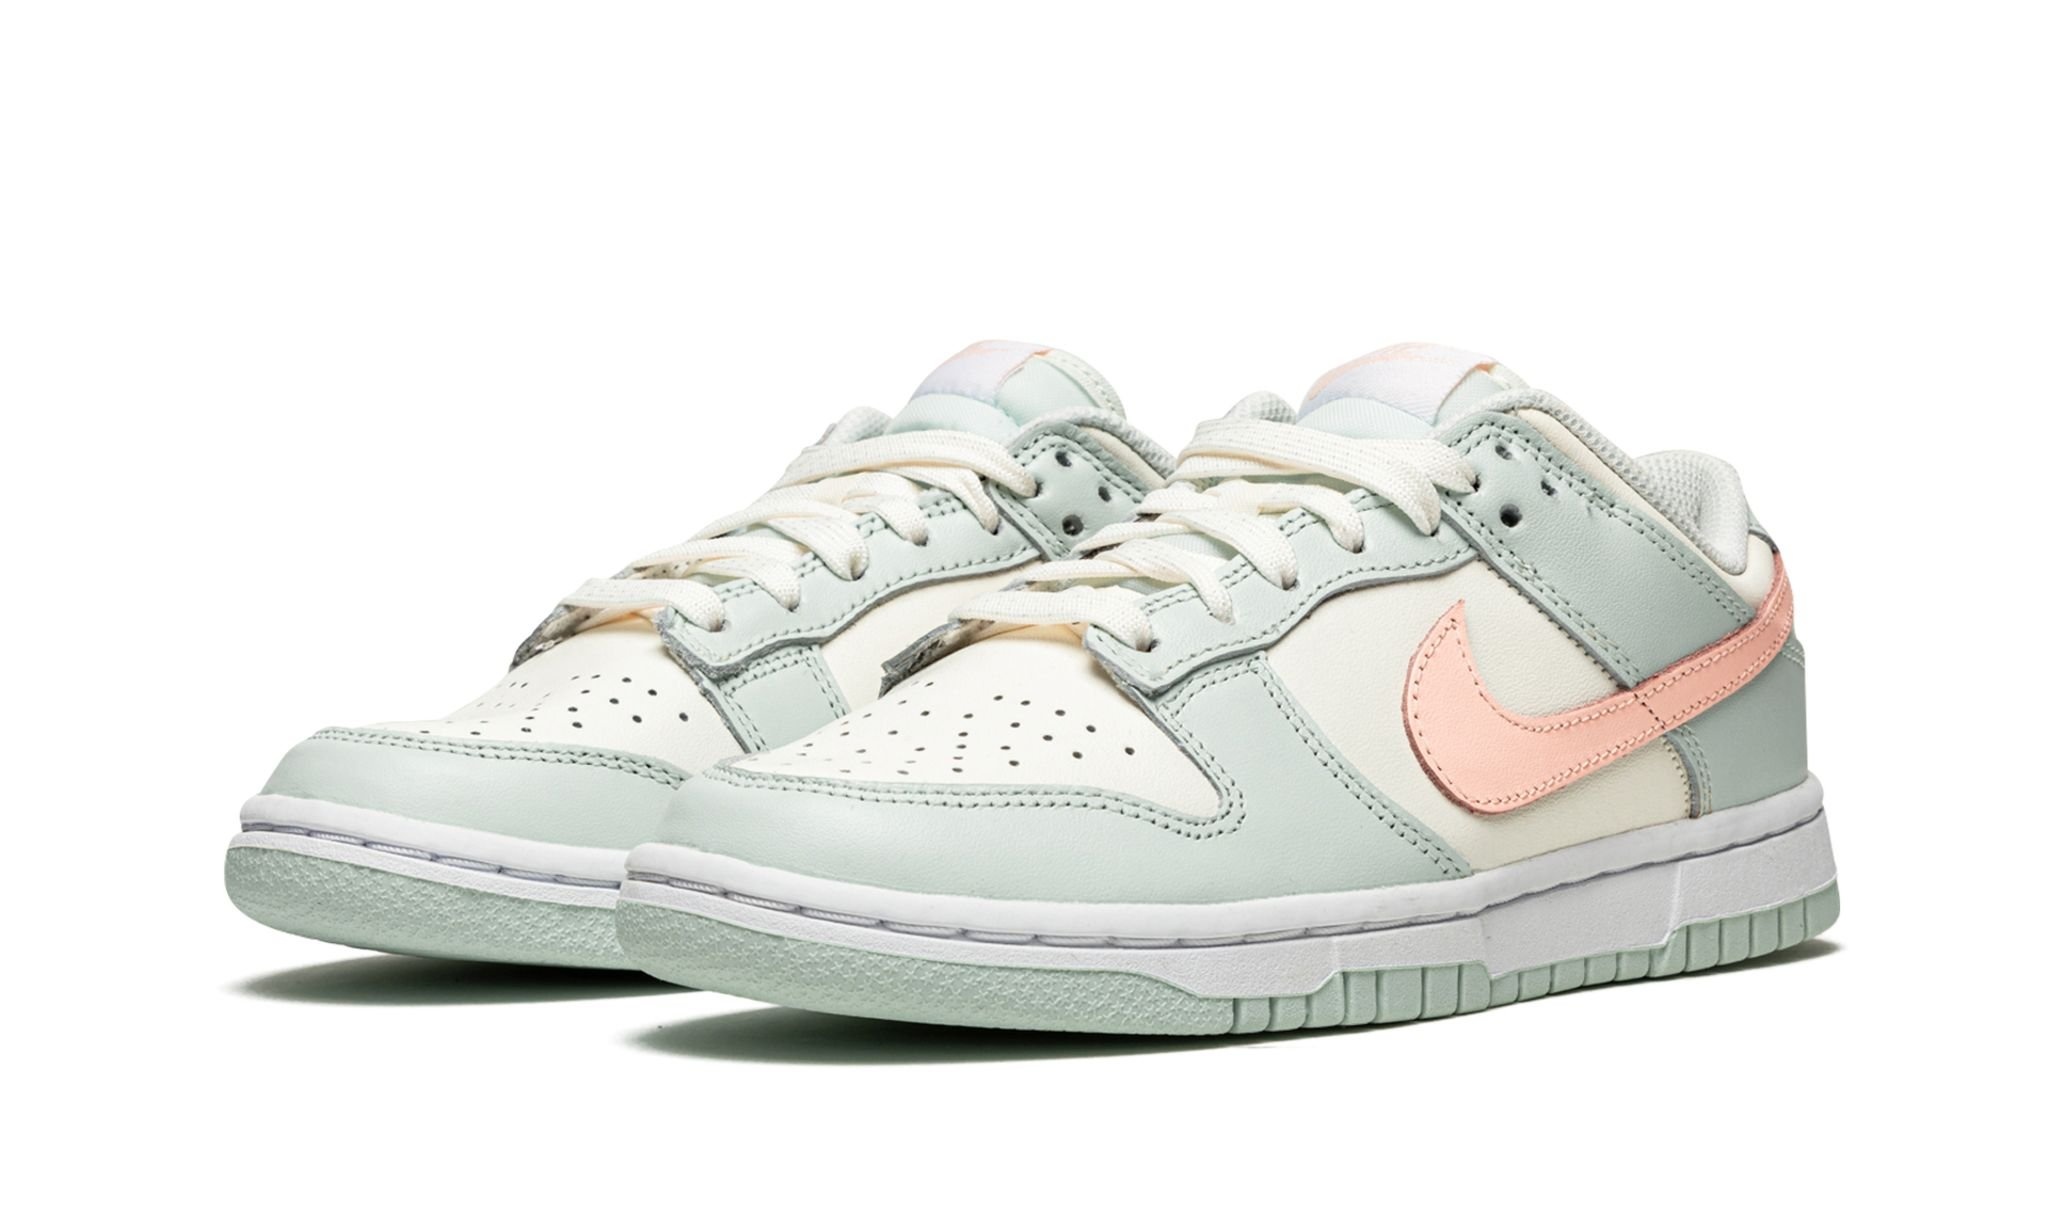 Dunk Low WMNS "Barely Green" - 2